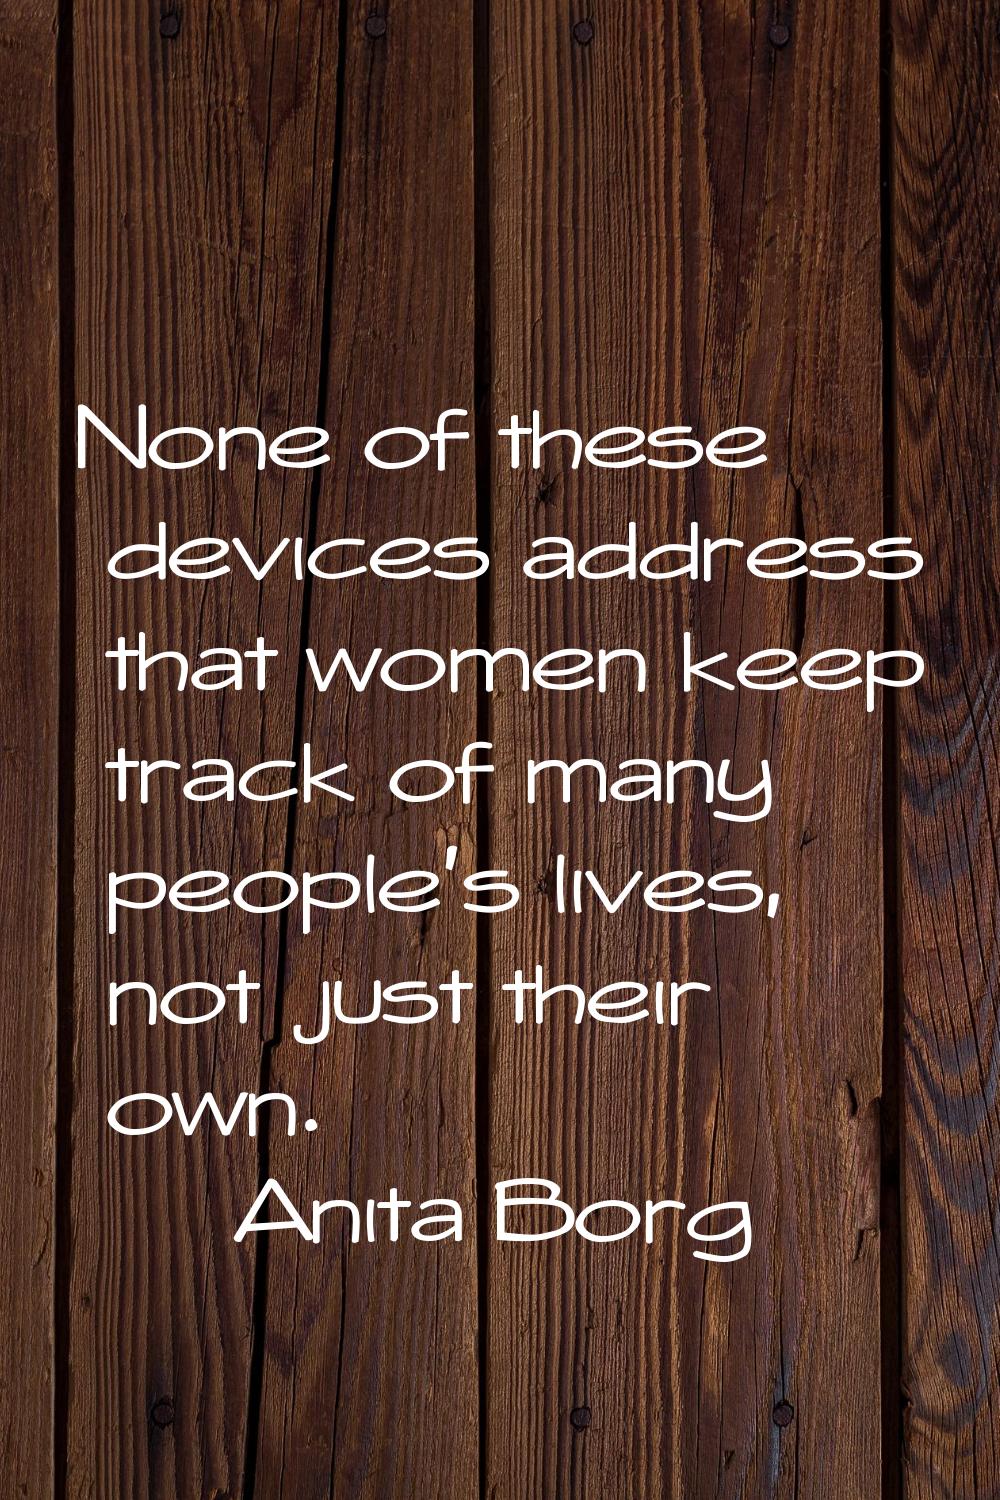 None of these devices address that women keep track of many people's lives, not just their own.